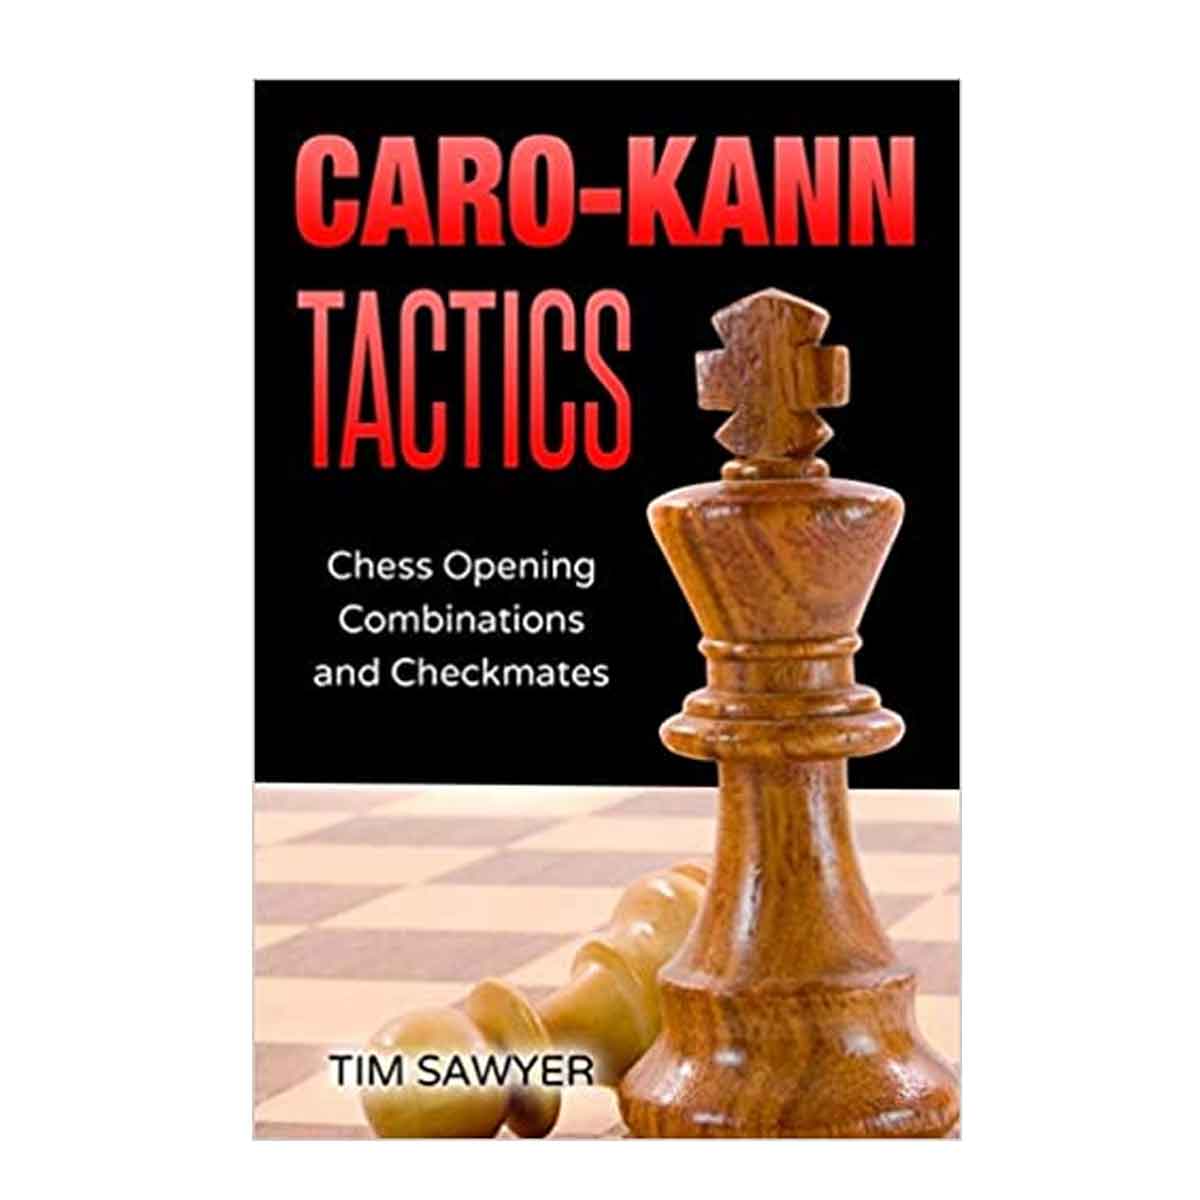 7 move checkmate trap in the Caro Kann Fantasy Cariation! #checkmate